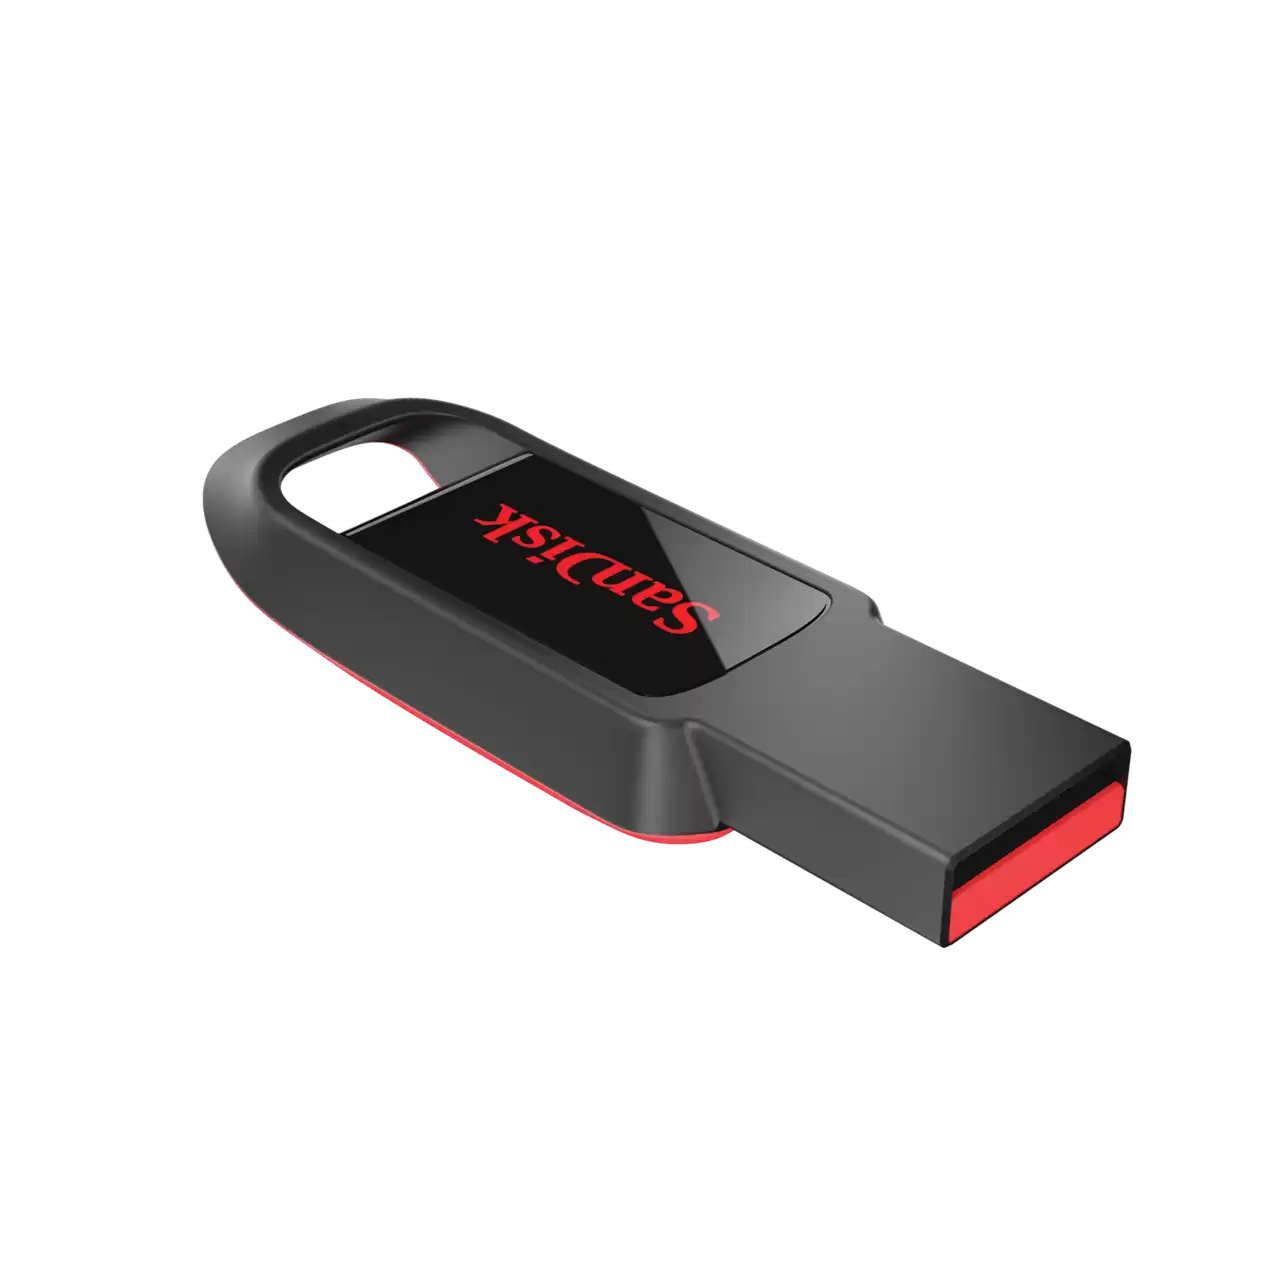 SanDisk Cruzer Spark Compact USB 2.0 Flash Drive for PC and Mac (16GB)